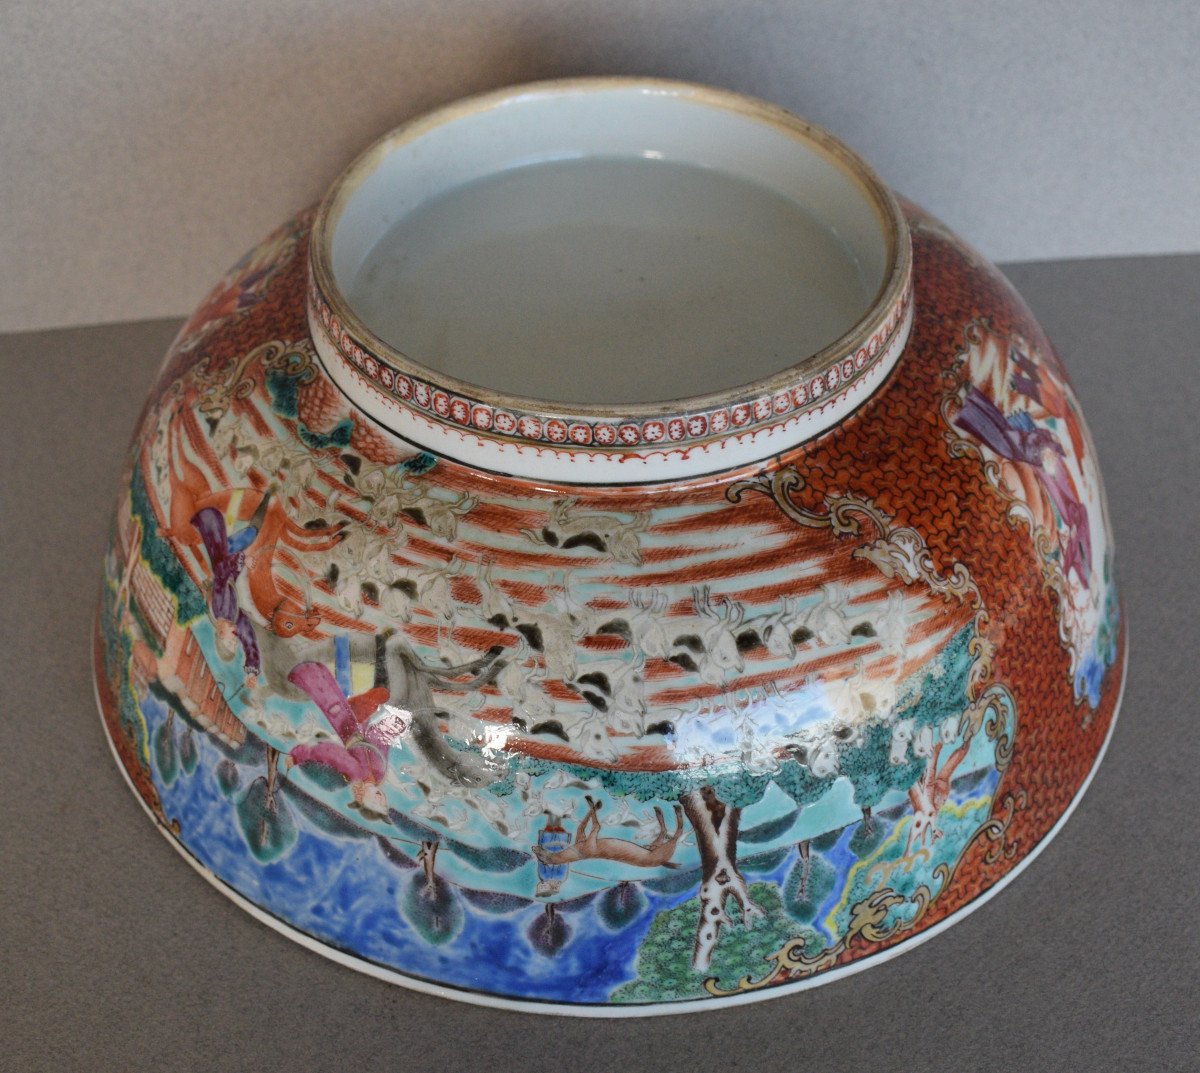 Large Porcelain Bowl From The Compagnie Des Indes Decor With Mandarins China XVIII Eme Century-photo-7